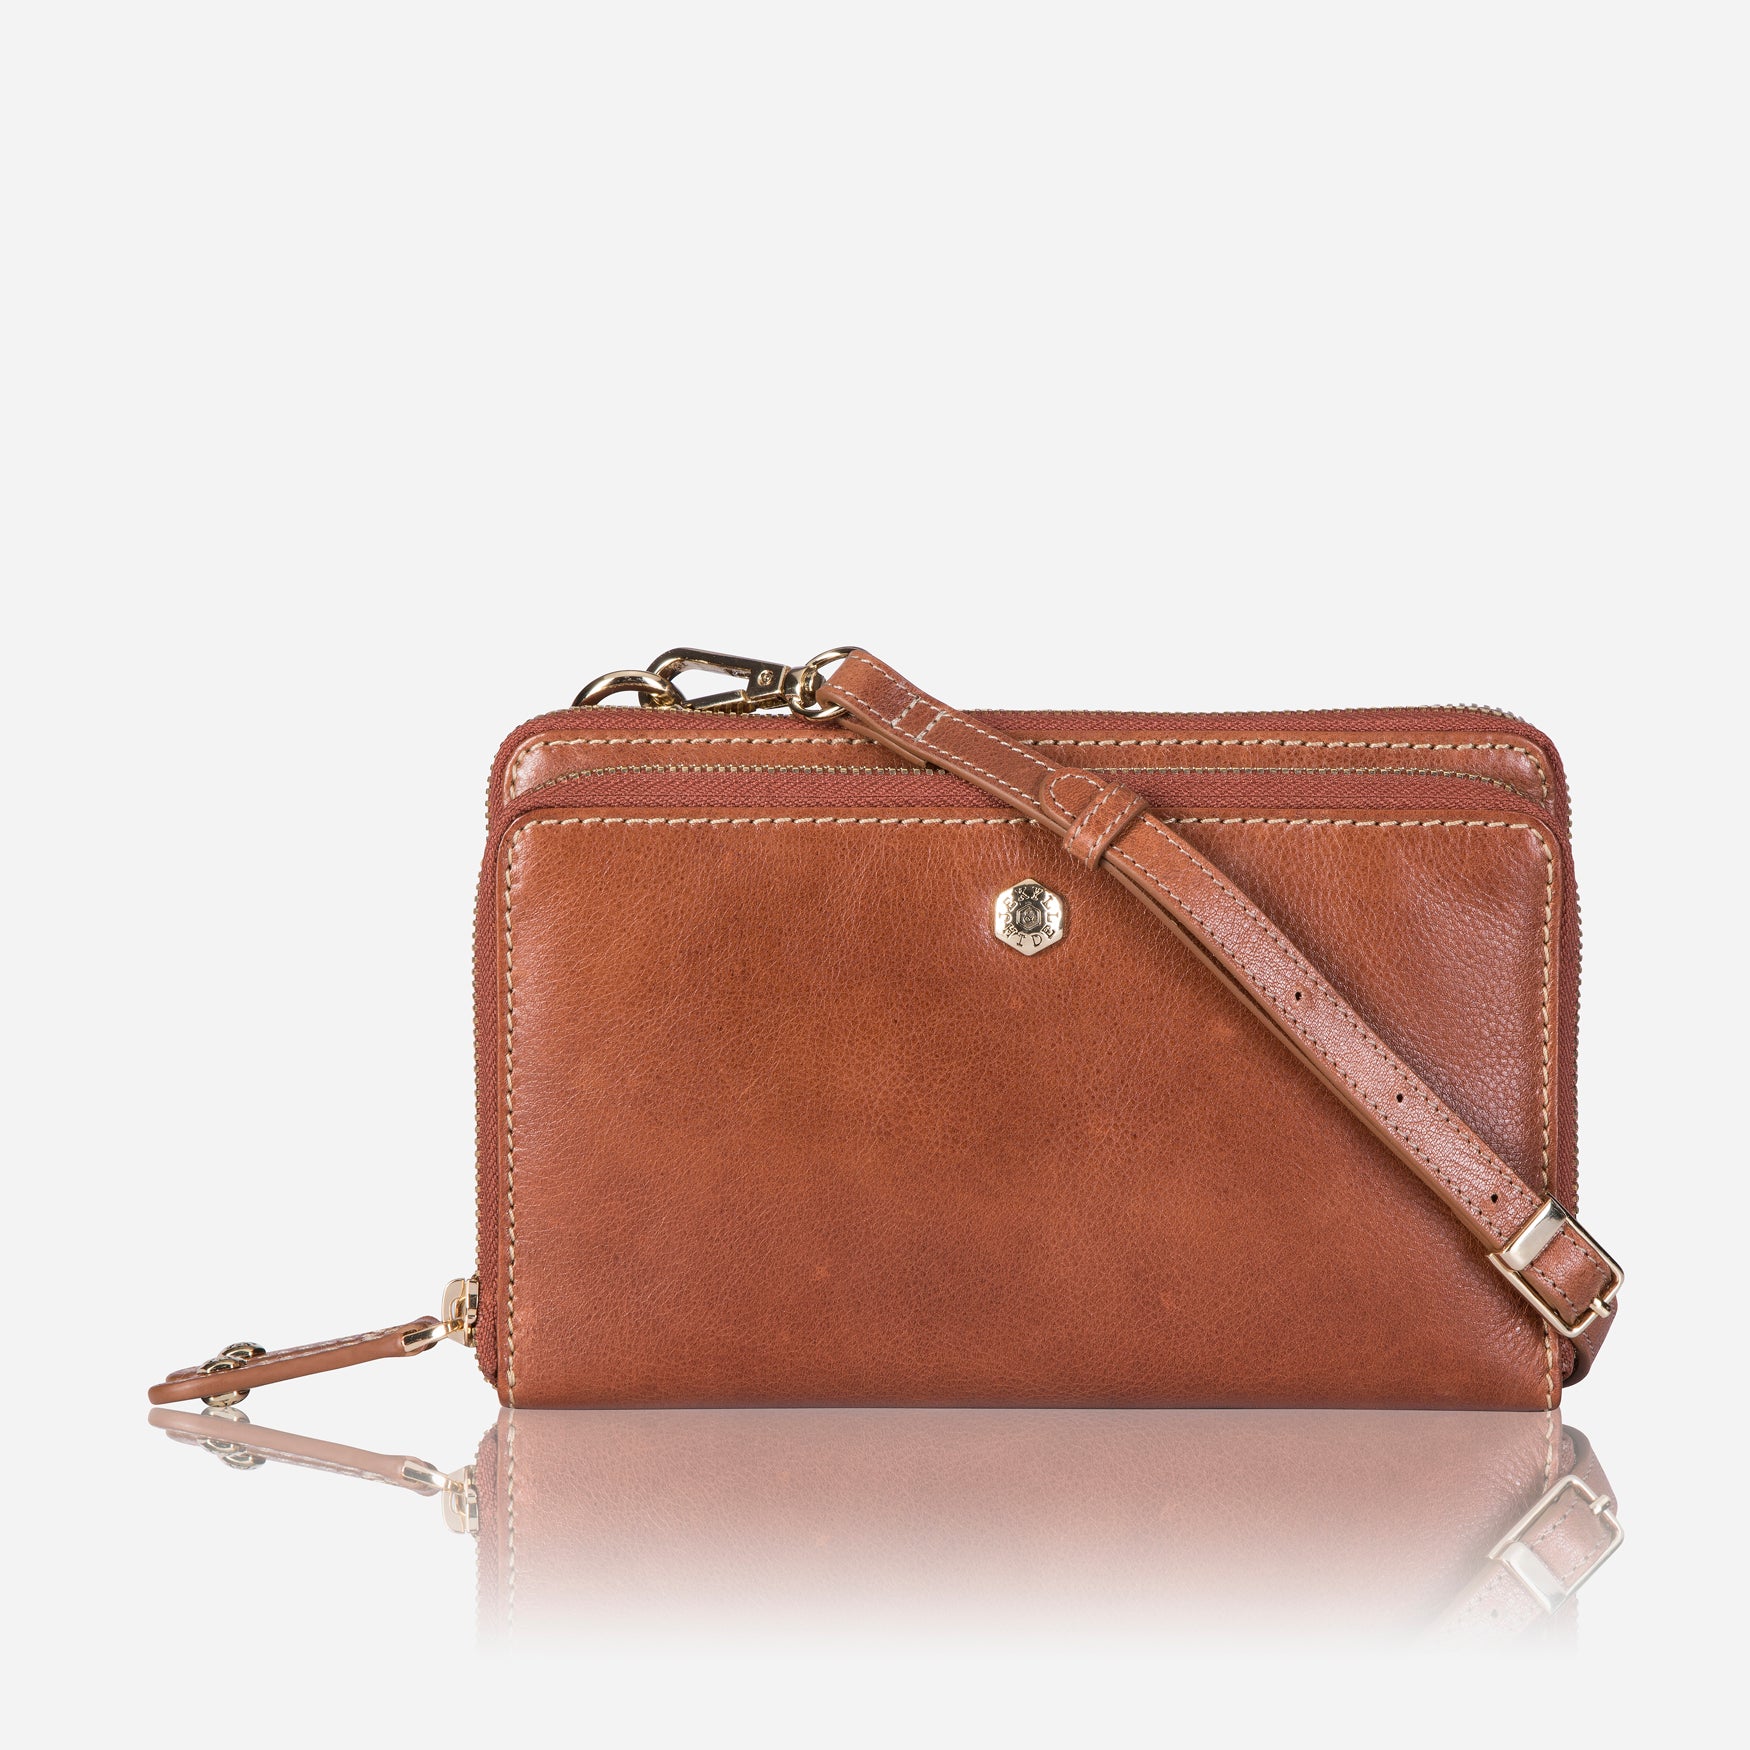 Ladies Large Leather Purse With Detachable Strap, Tan - Jekyll and Hide SA